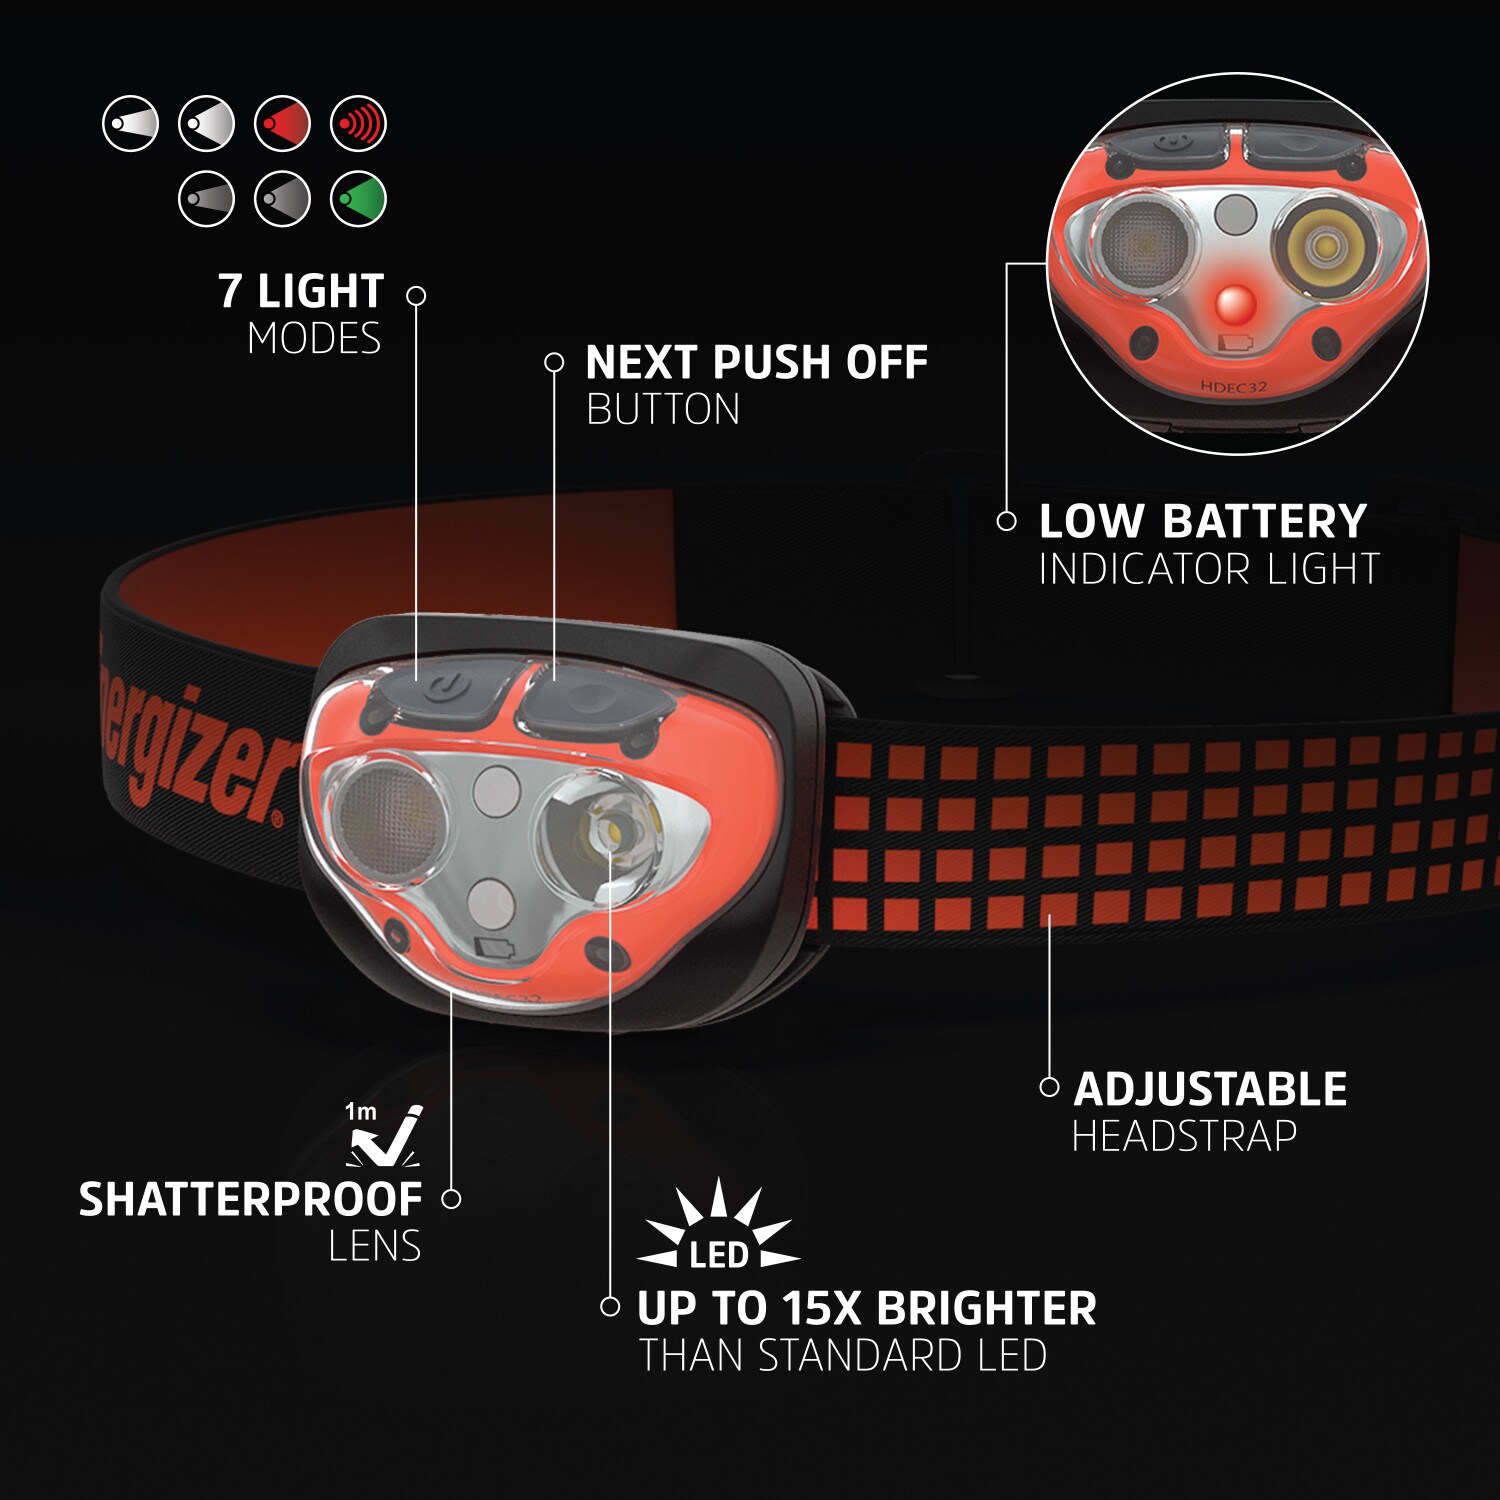 Energizer Vision 450-Lumen Headlamp (Battery department in Included) Headlamps LED the at